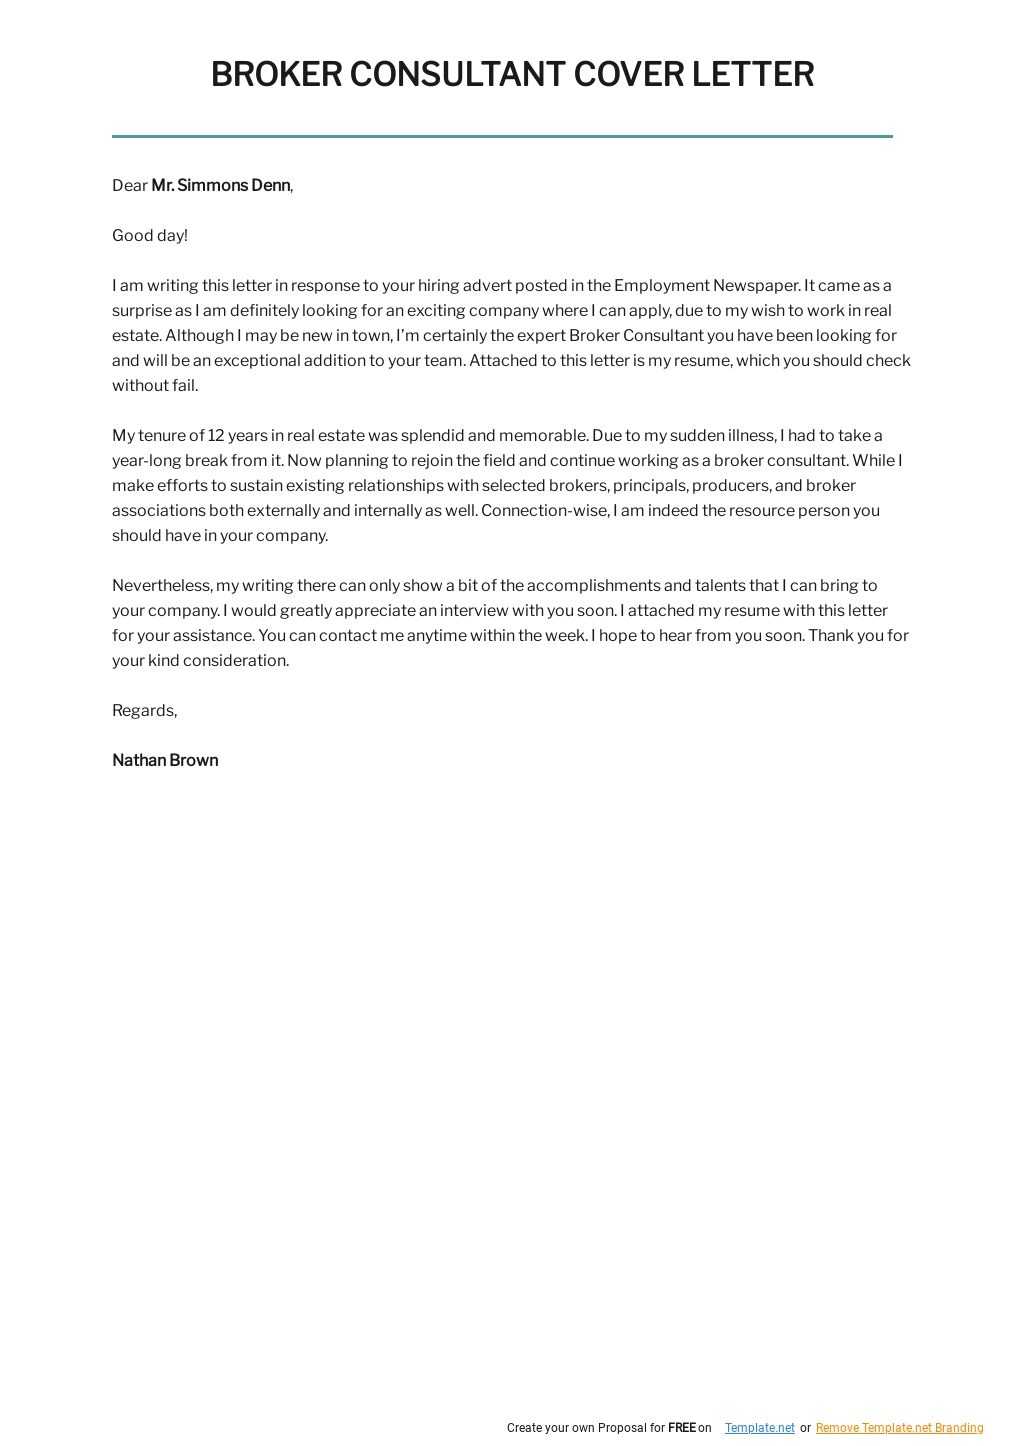 Free Broker Consultant Cover Letter Template.jpe